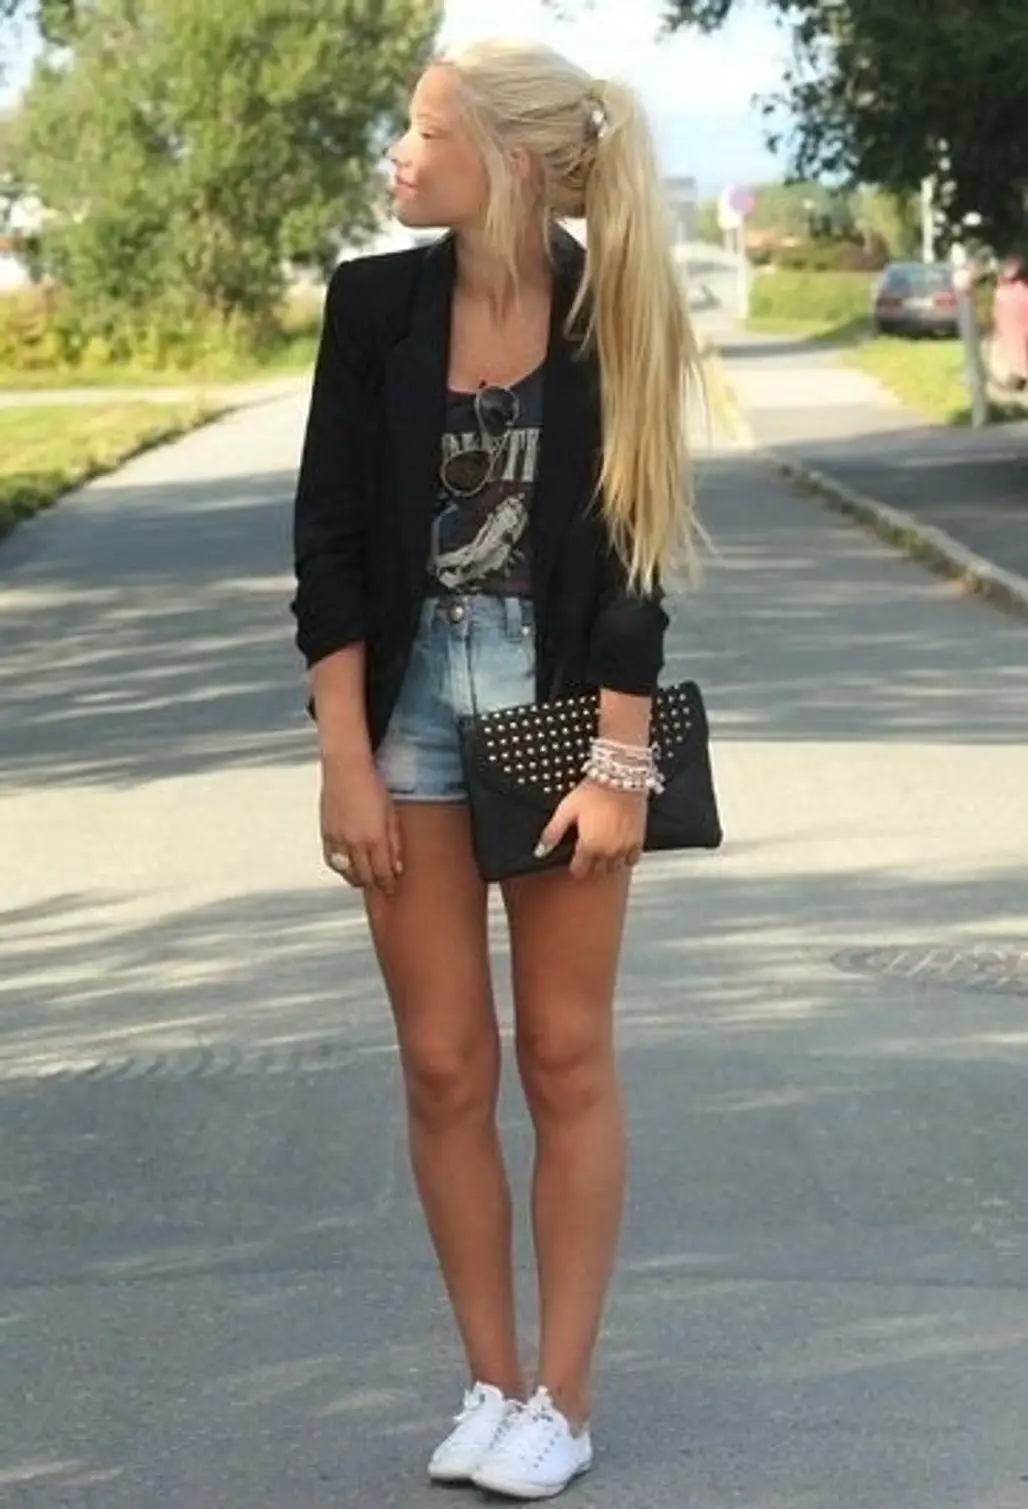 Fashionable with a Blazer and Shorts